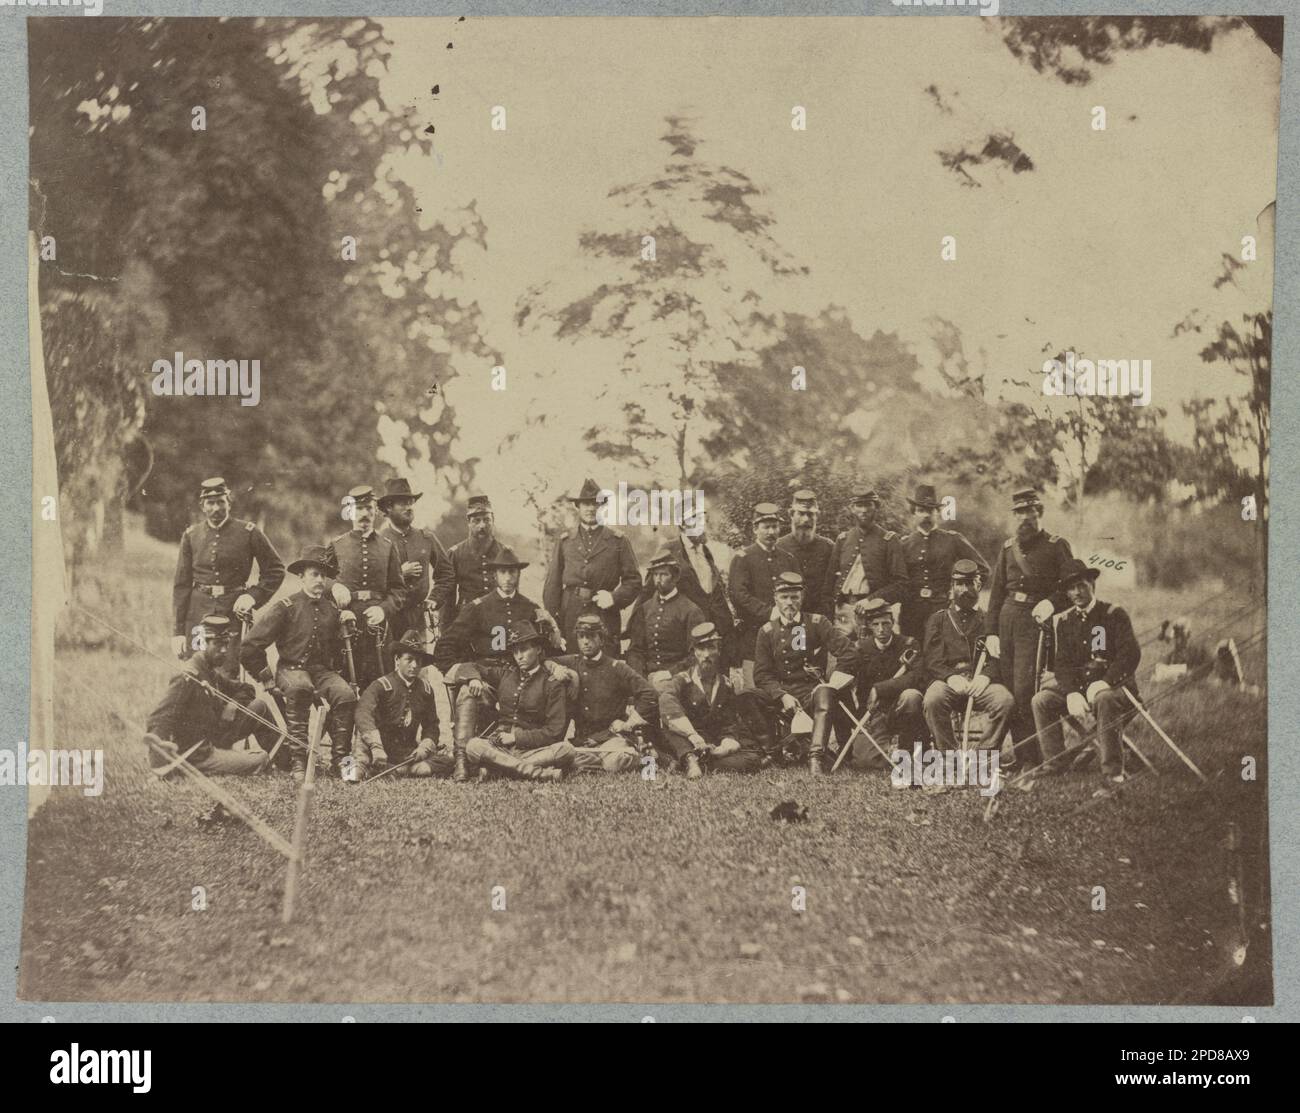 Officers of 3d Pennsylvania Cavalry. Title from item, Gift; Col. Godwin Ordway; 1948. United States, Army, Pennsylvania Cavalry Regiment, 3rd (1861-1865), United States, History, Civil War, 1861-1865. Stock Photo